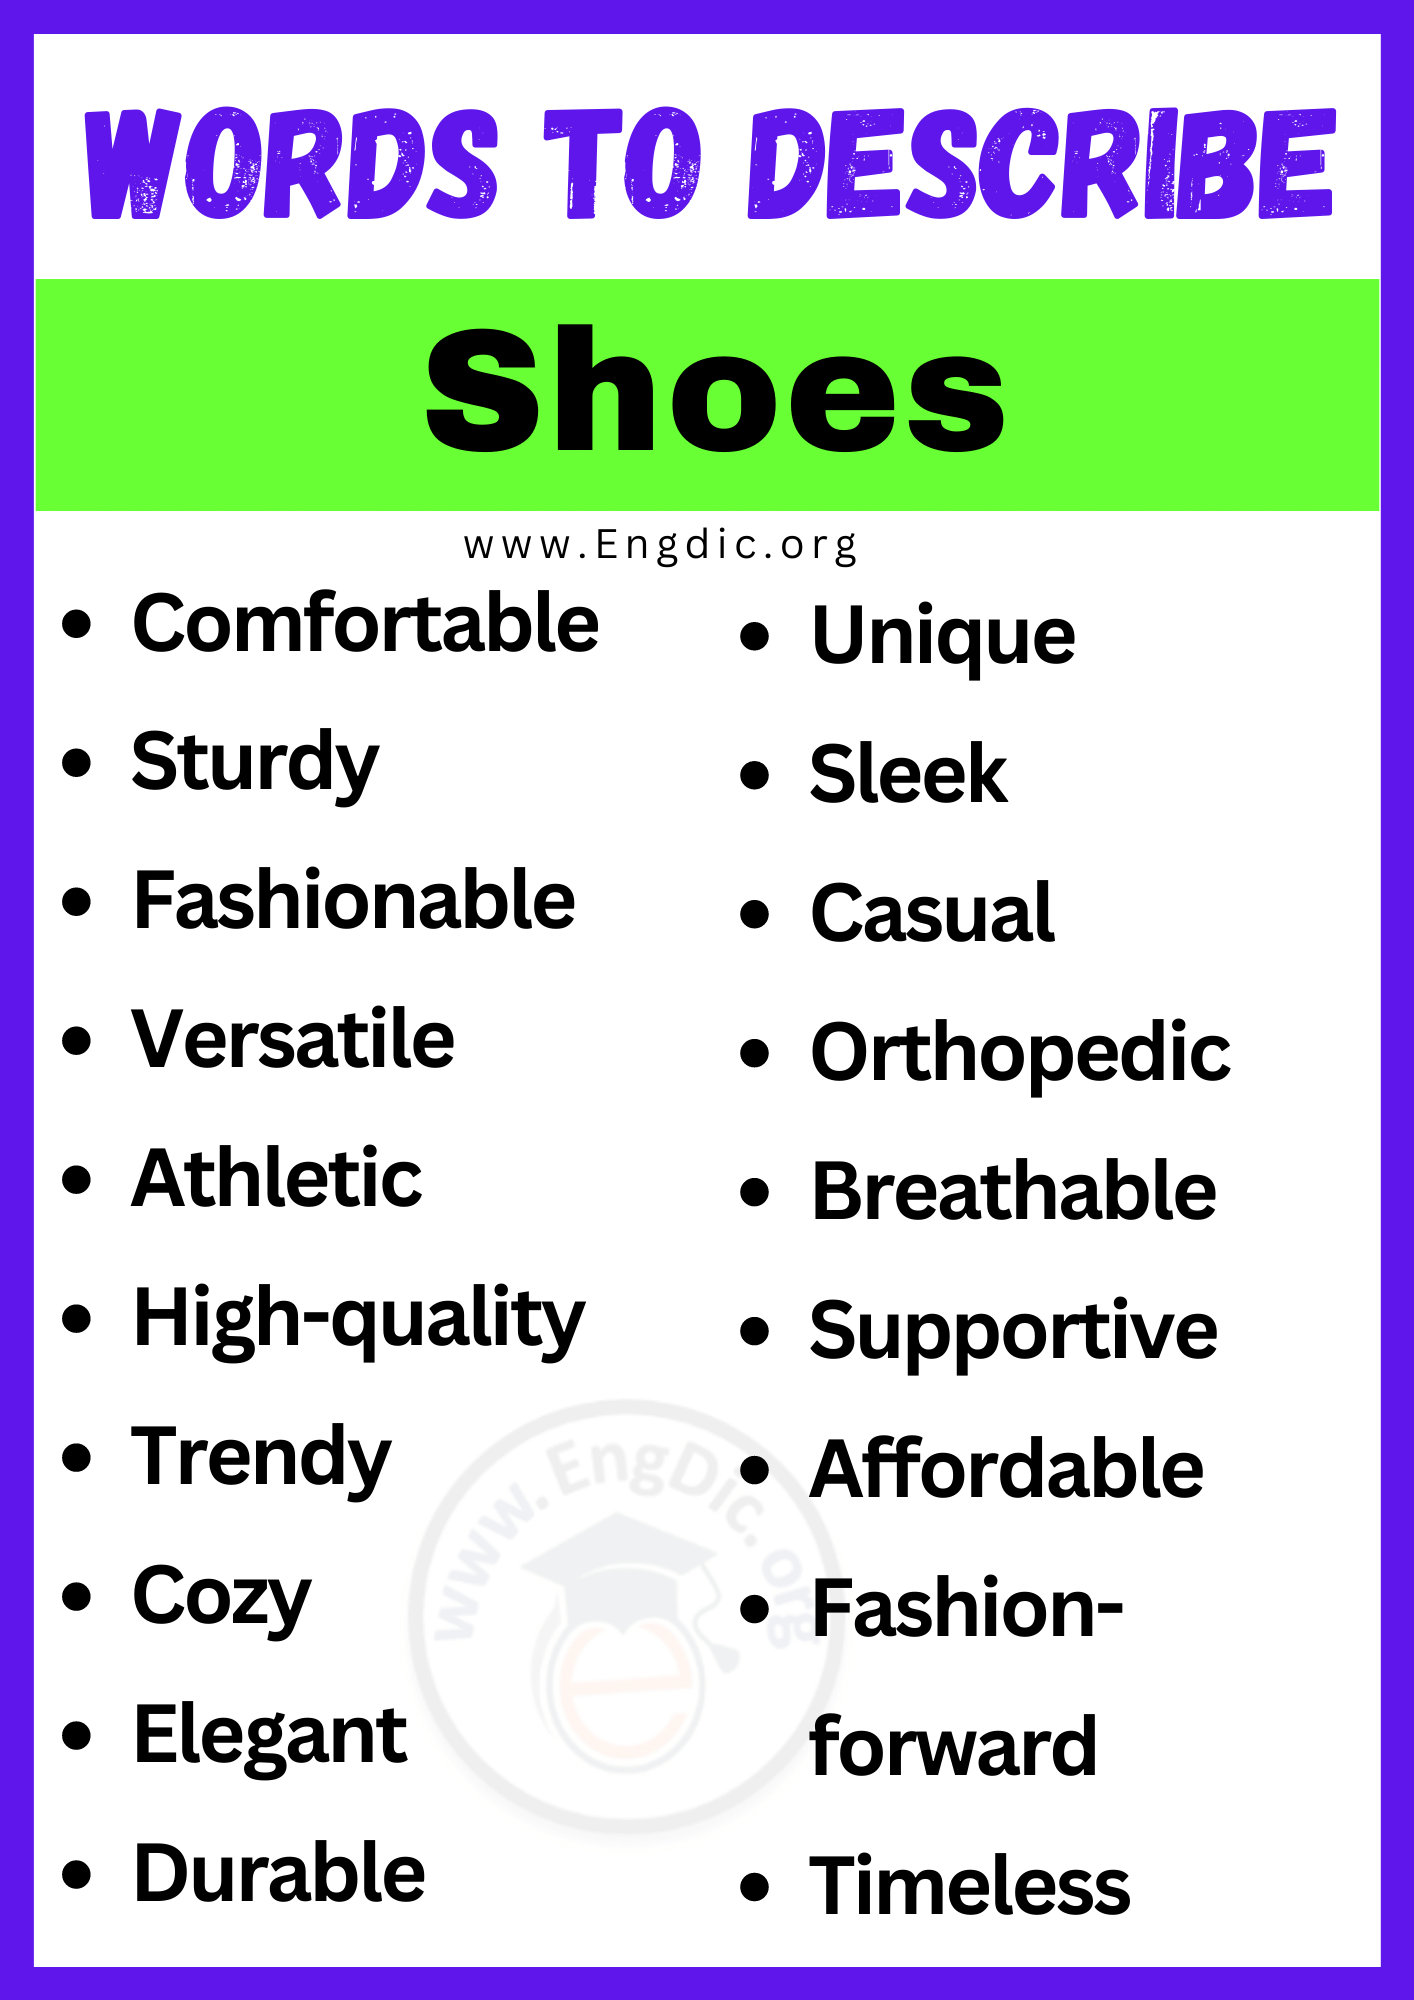 Words to Describe Shoes